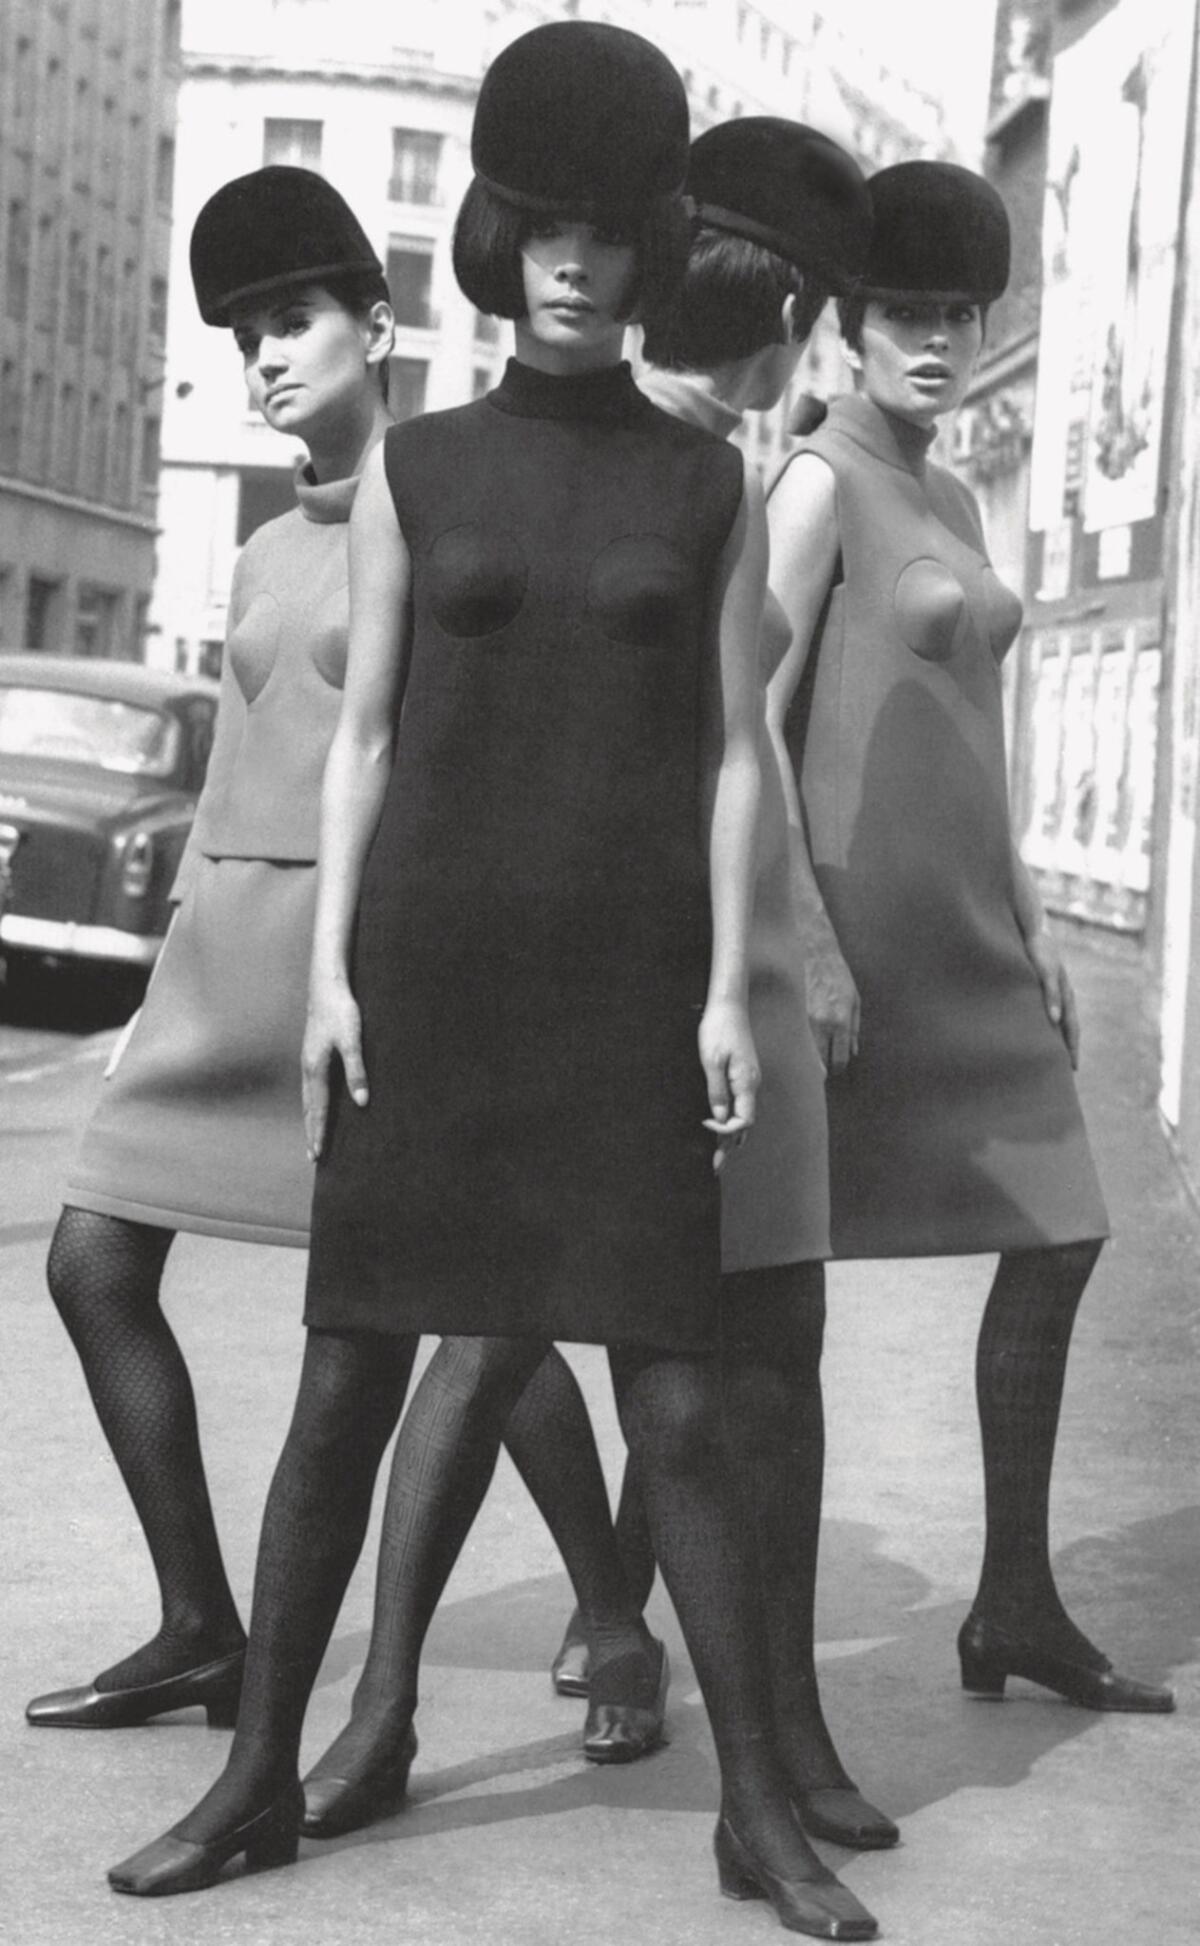 Pierre Cardin's cocktail dresses with conical breasts, 1966.